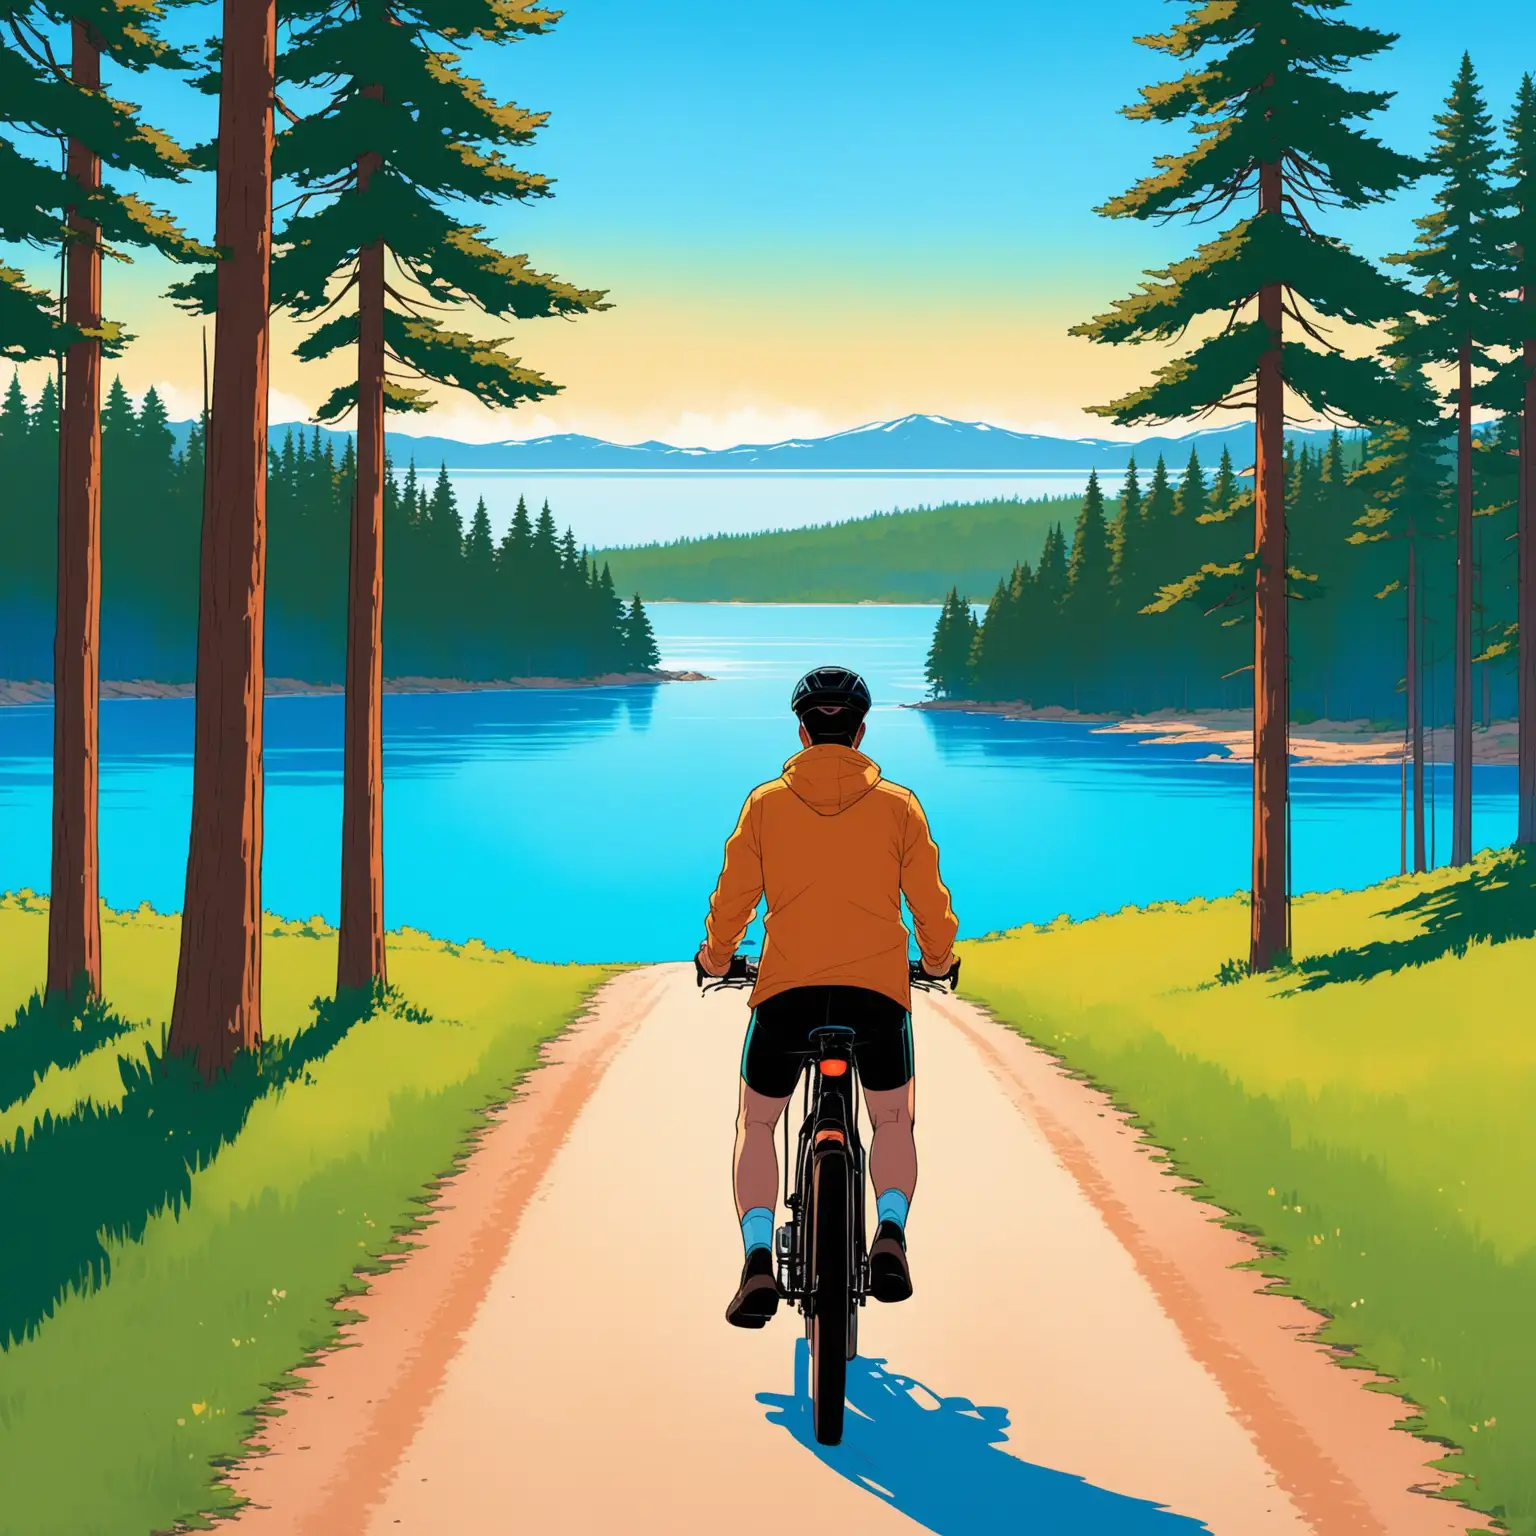 simple colorful illustration of rear view of a man on a bike on a trail that leads to a blue lake. pine trees in the distance on the horizon